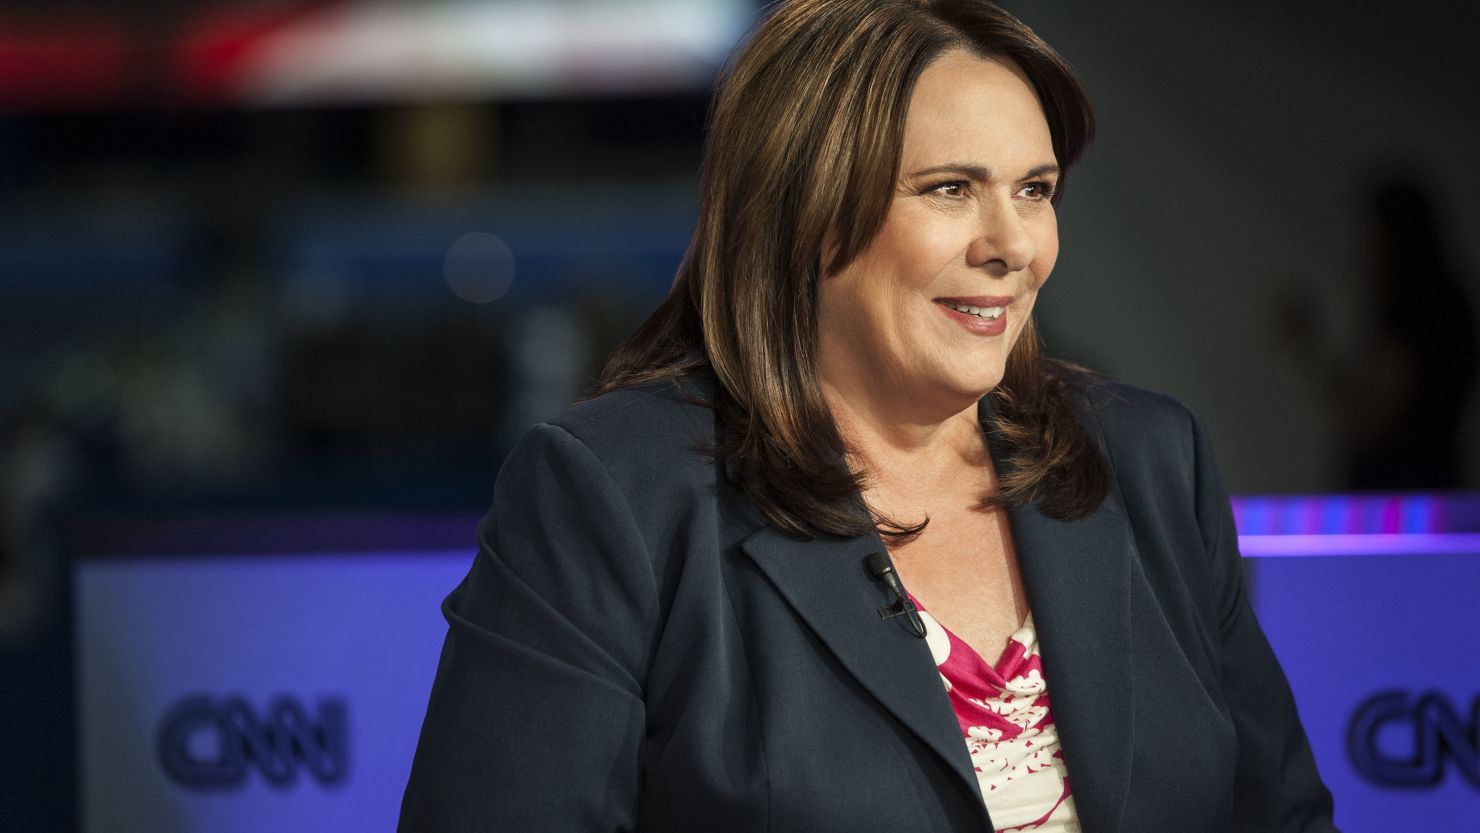 Long-time political correspondent Candy Crowley is leaving CNN after 27 years at the network. 